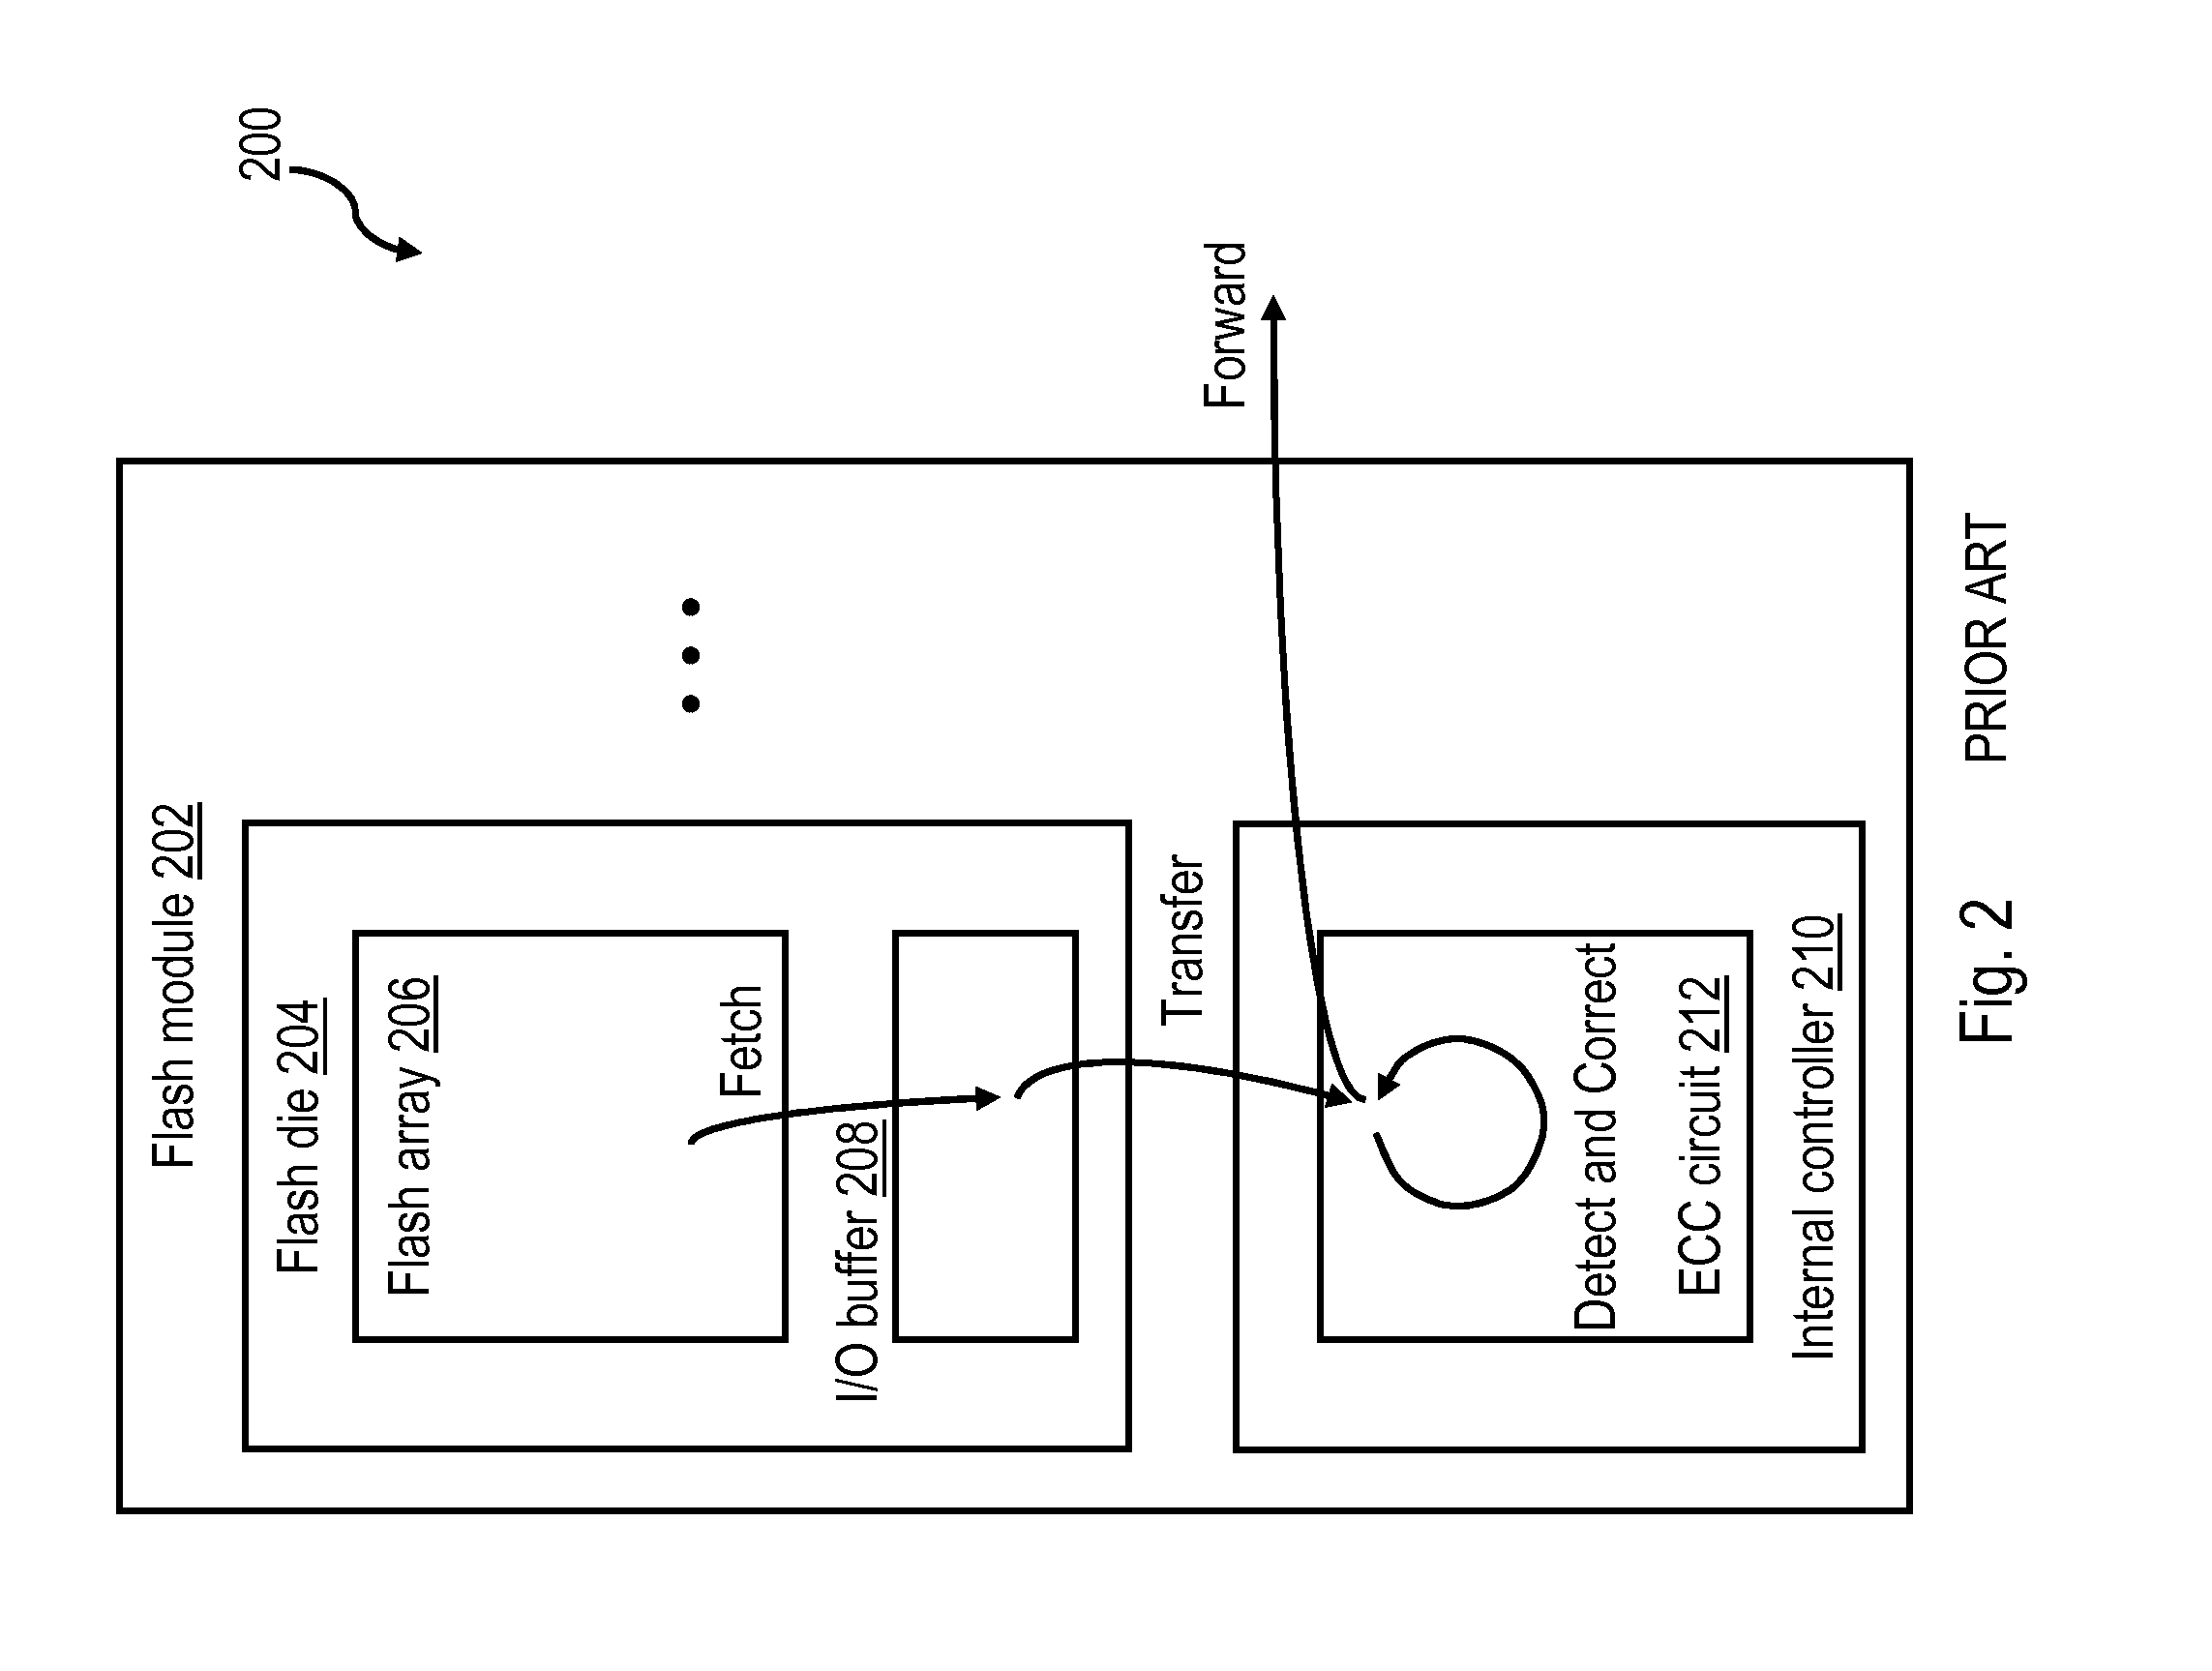 Reducing error correction latency in a data storage system having lossy storage media